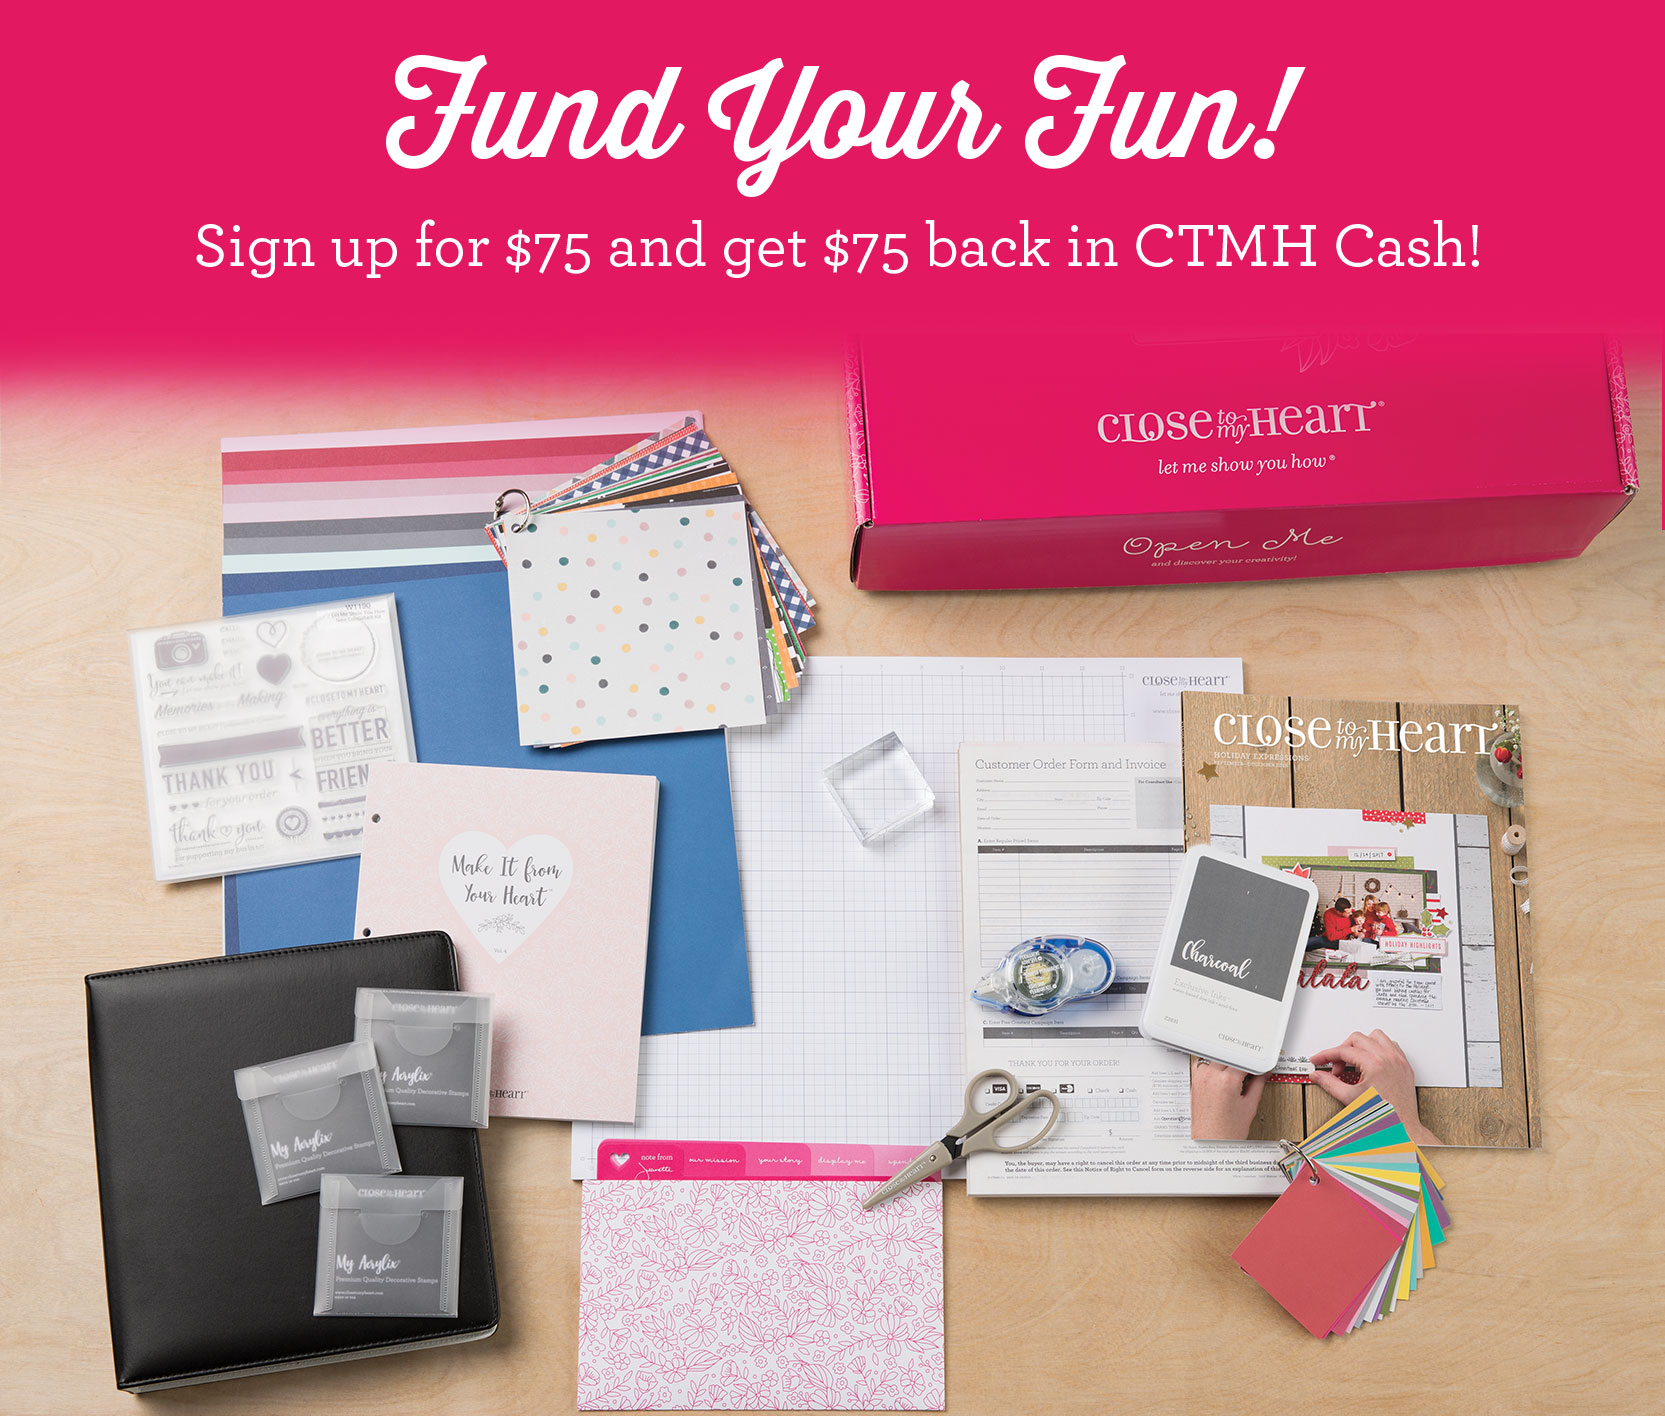 November CTMH Fund Your Fun Special